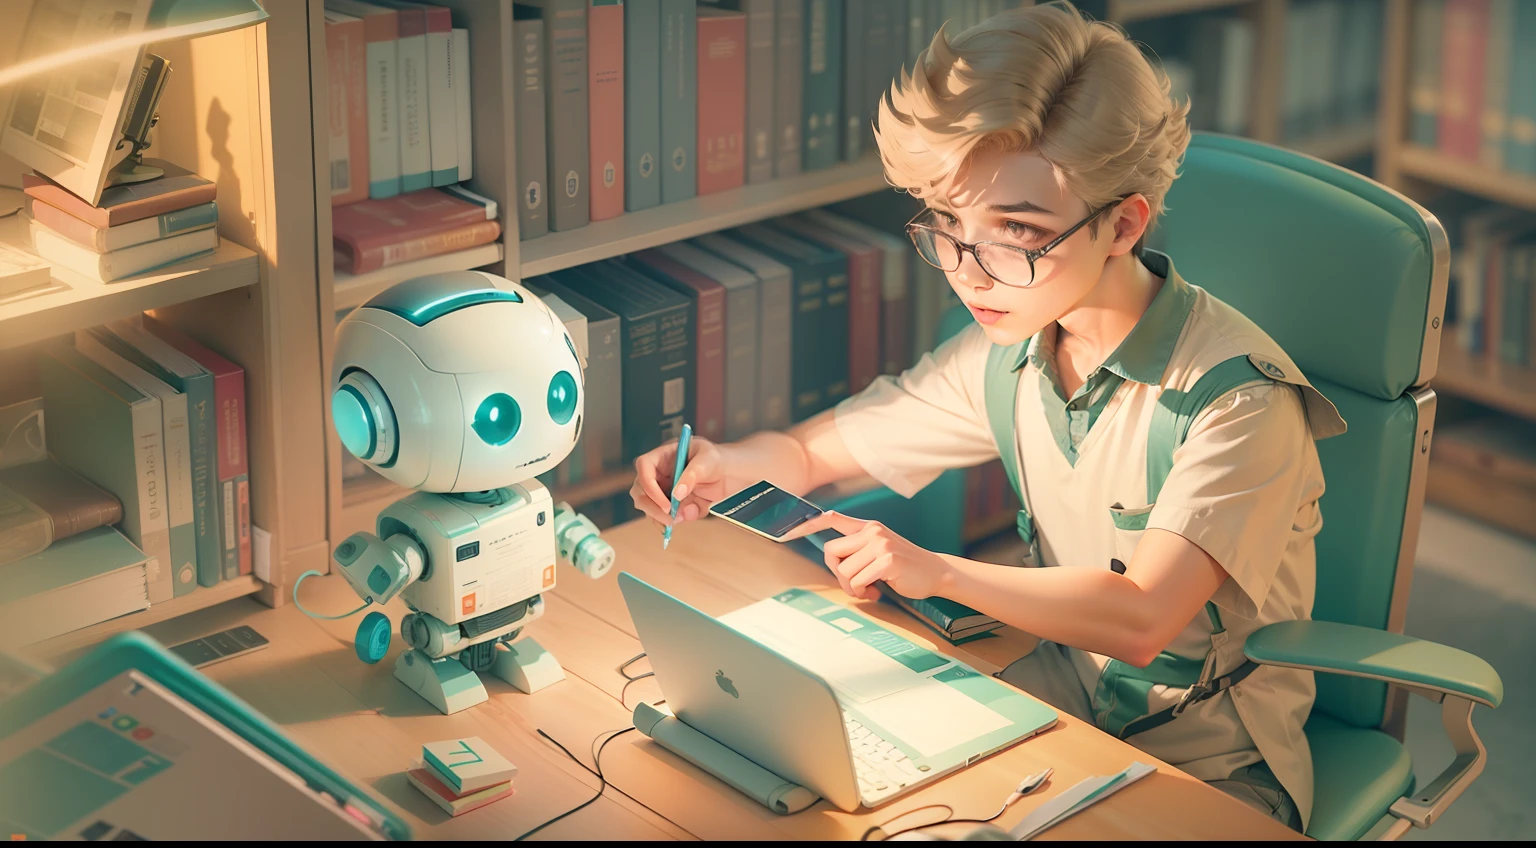 A AI Robot and a cute fairy boy are studying on the computer, (((Operate PC))), A Man happily conversing with a robot, no glasses, ((vintage)), ((retro)), muted color, pastel tetradic colors, 3D vector art, light background, cute and quirky, fantasy art, watercolor effect, bokeh, Adobe Illustrator, hand-drawn, digital painting, low-poly, soft lighting, bird's-eye view, isometric style, retro aesthetic, focused on the character, 4K resolution, photorealistic rendering, using Cinema 4D, (((Detailed interior of the library)))